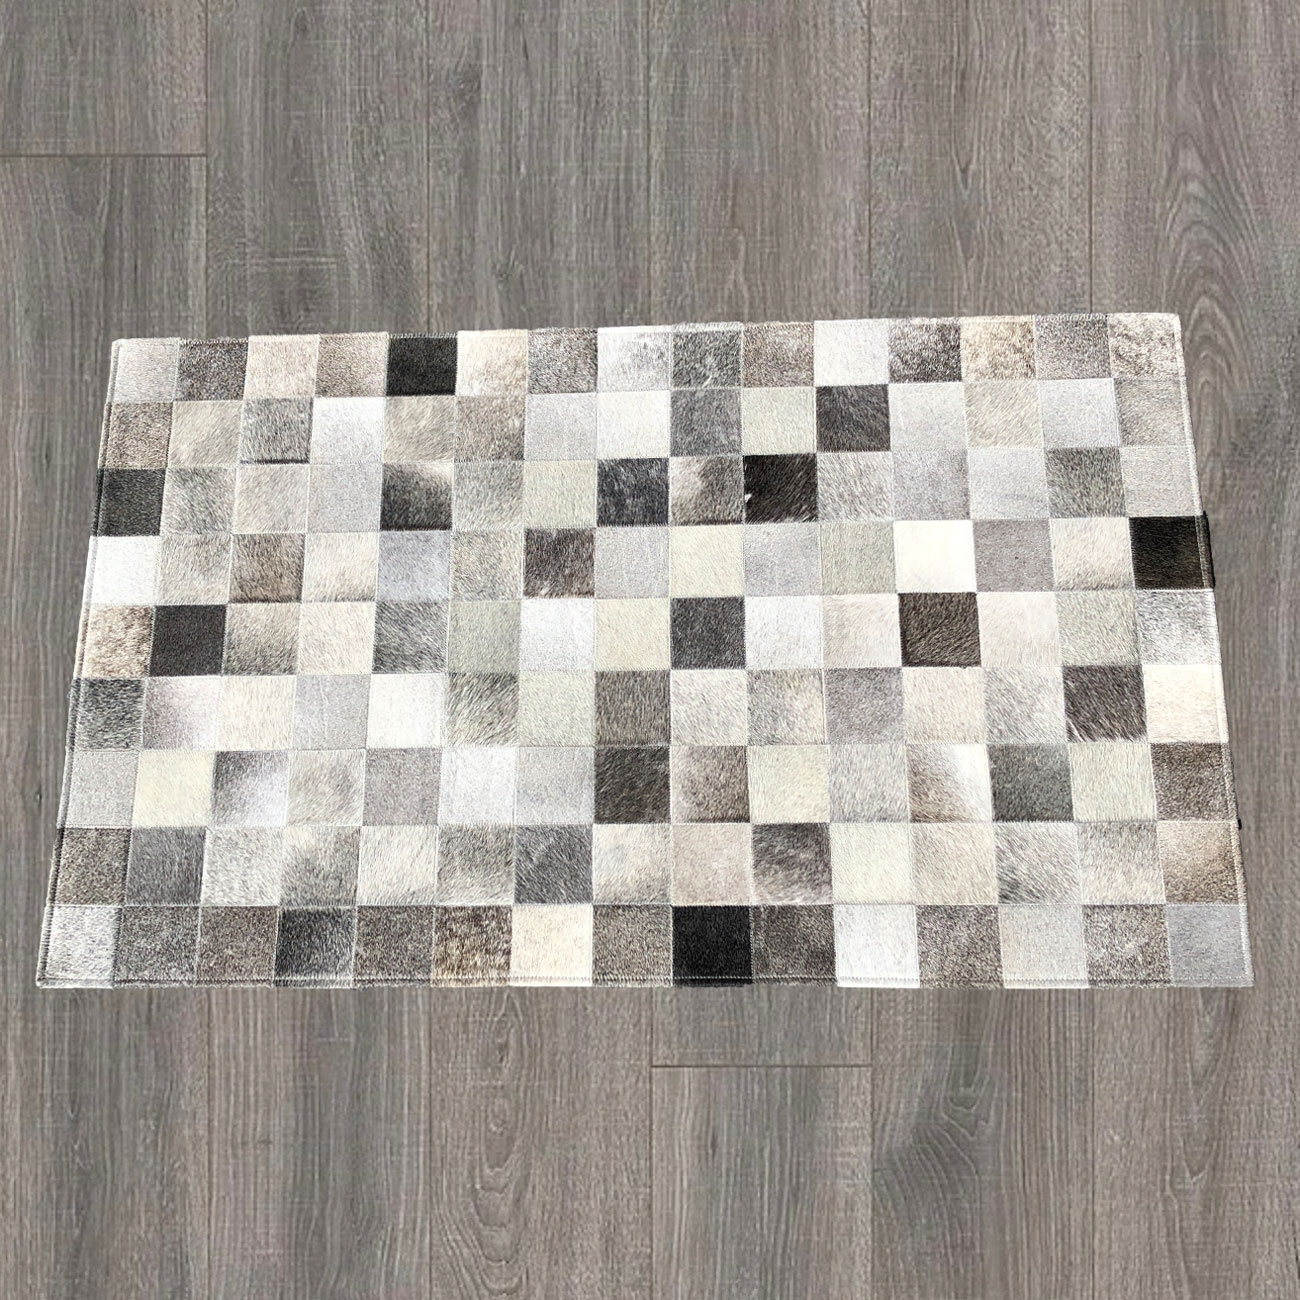 Mixed Gray Patchwork Cowhide Rug, Patchwork Cowhide Rug Gray